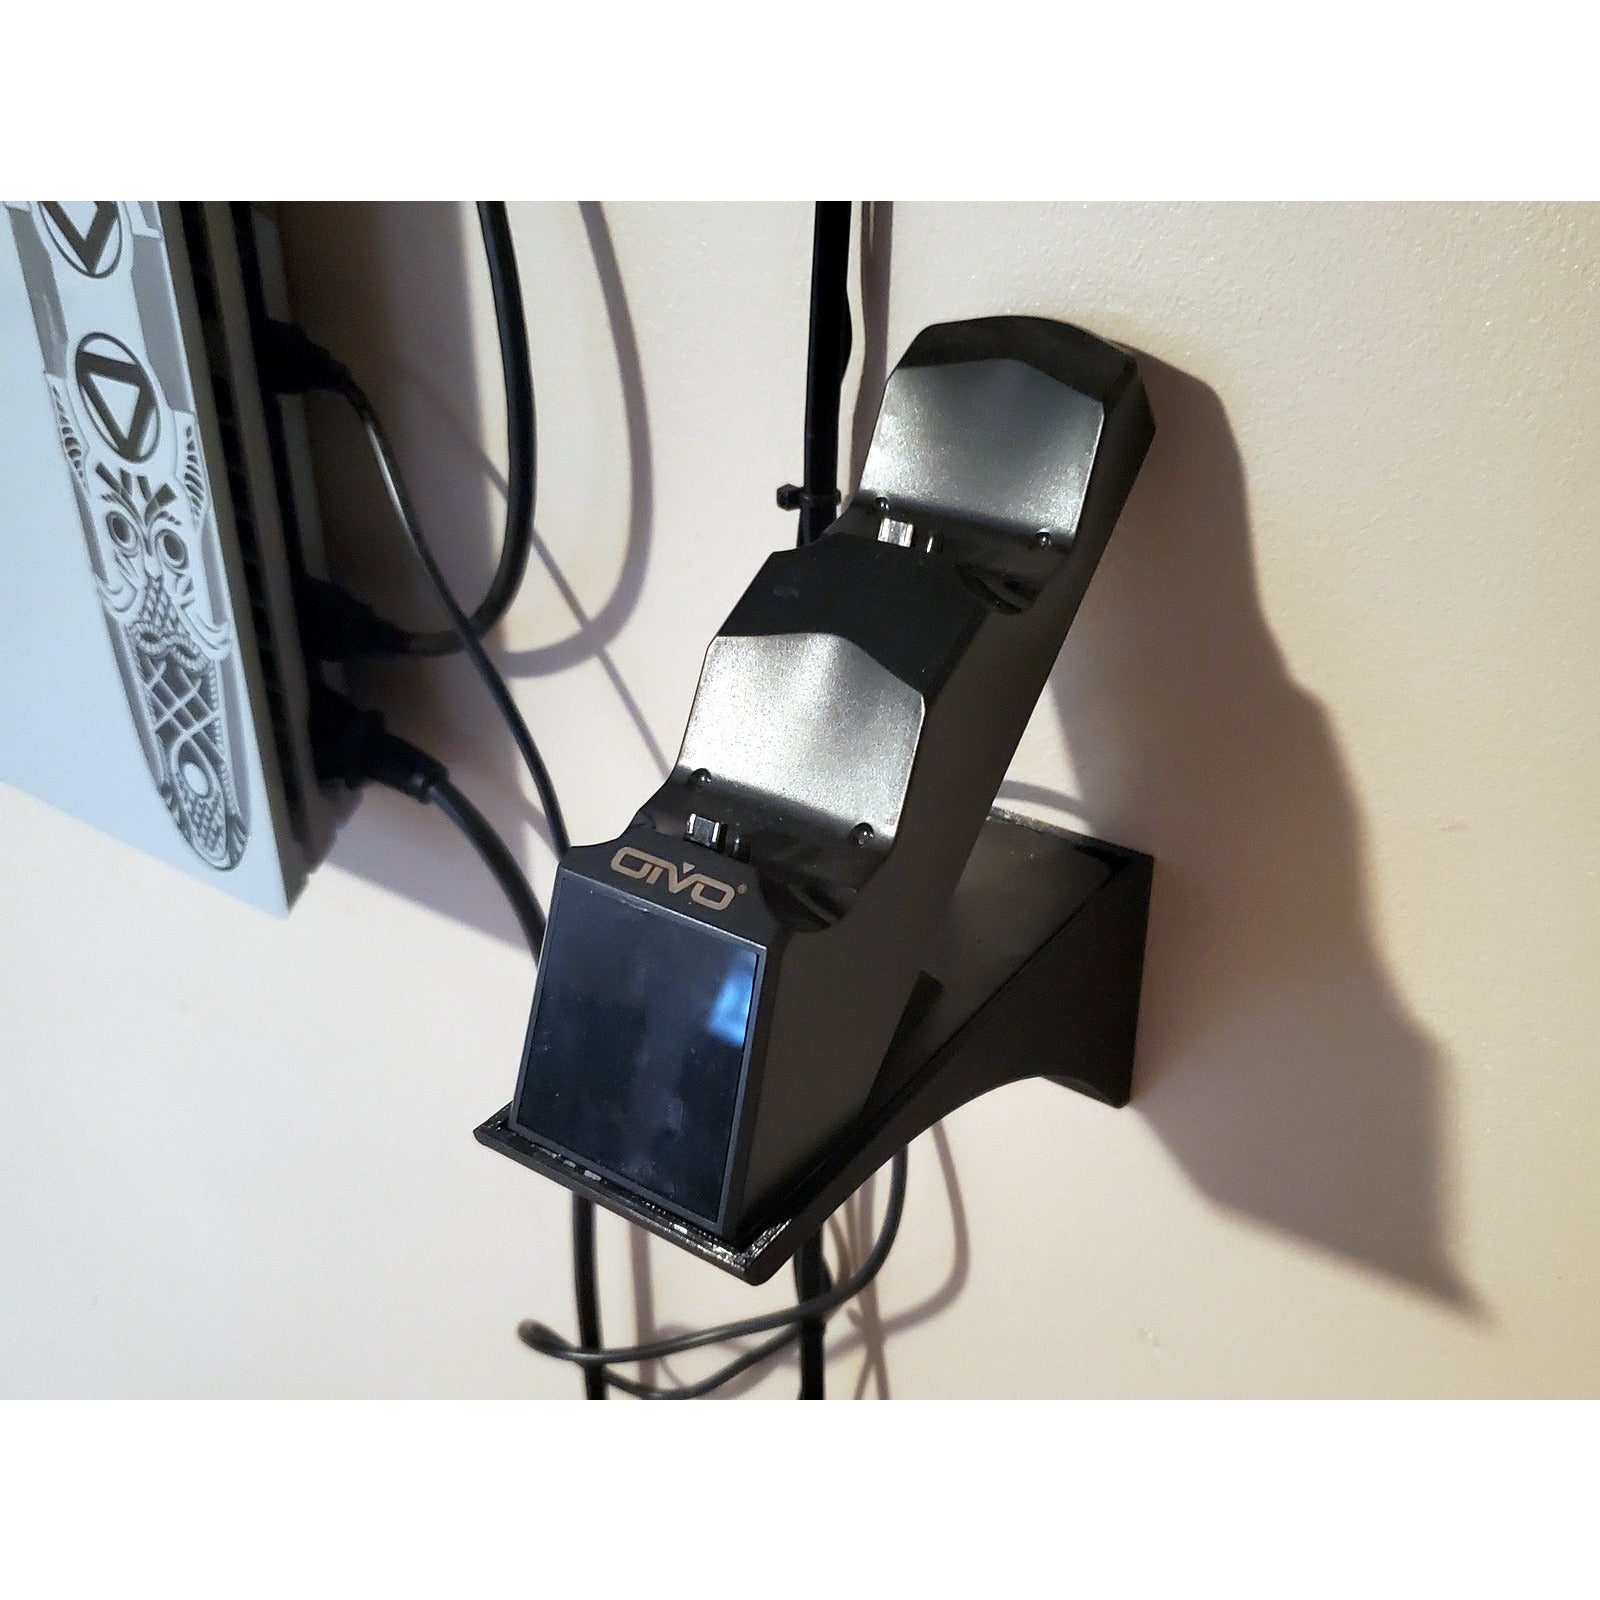 PS4 Controller Charger Wall Mount